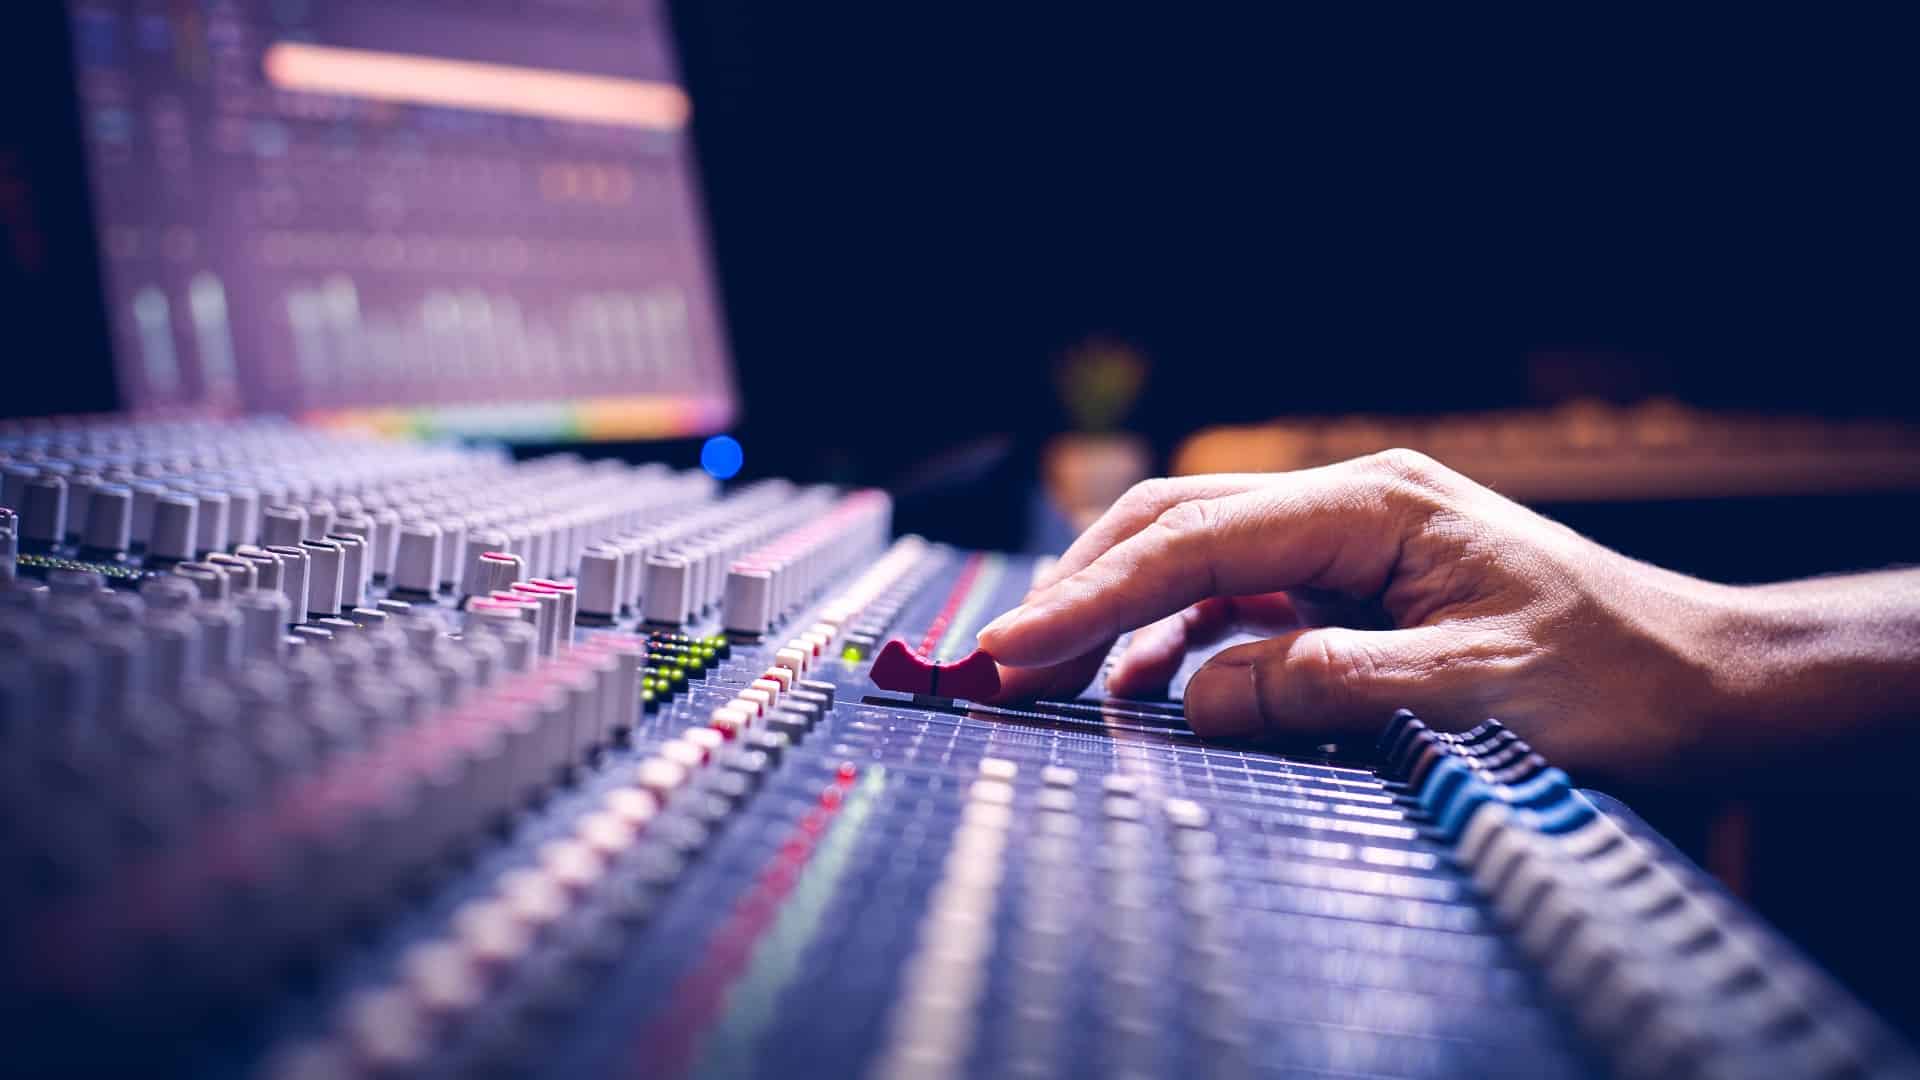 male producer, sound engineer hands working on audio mixing console in broadcasting, recording studio